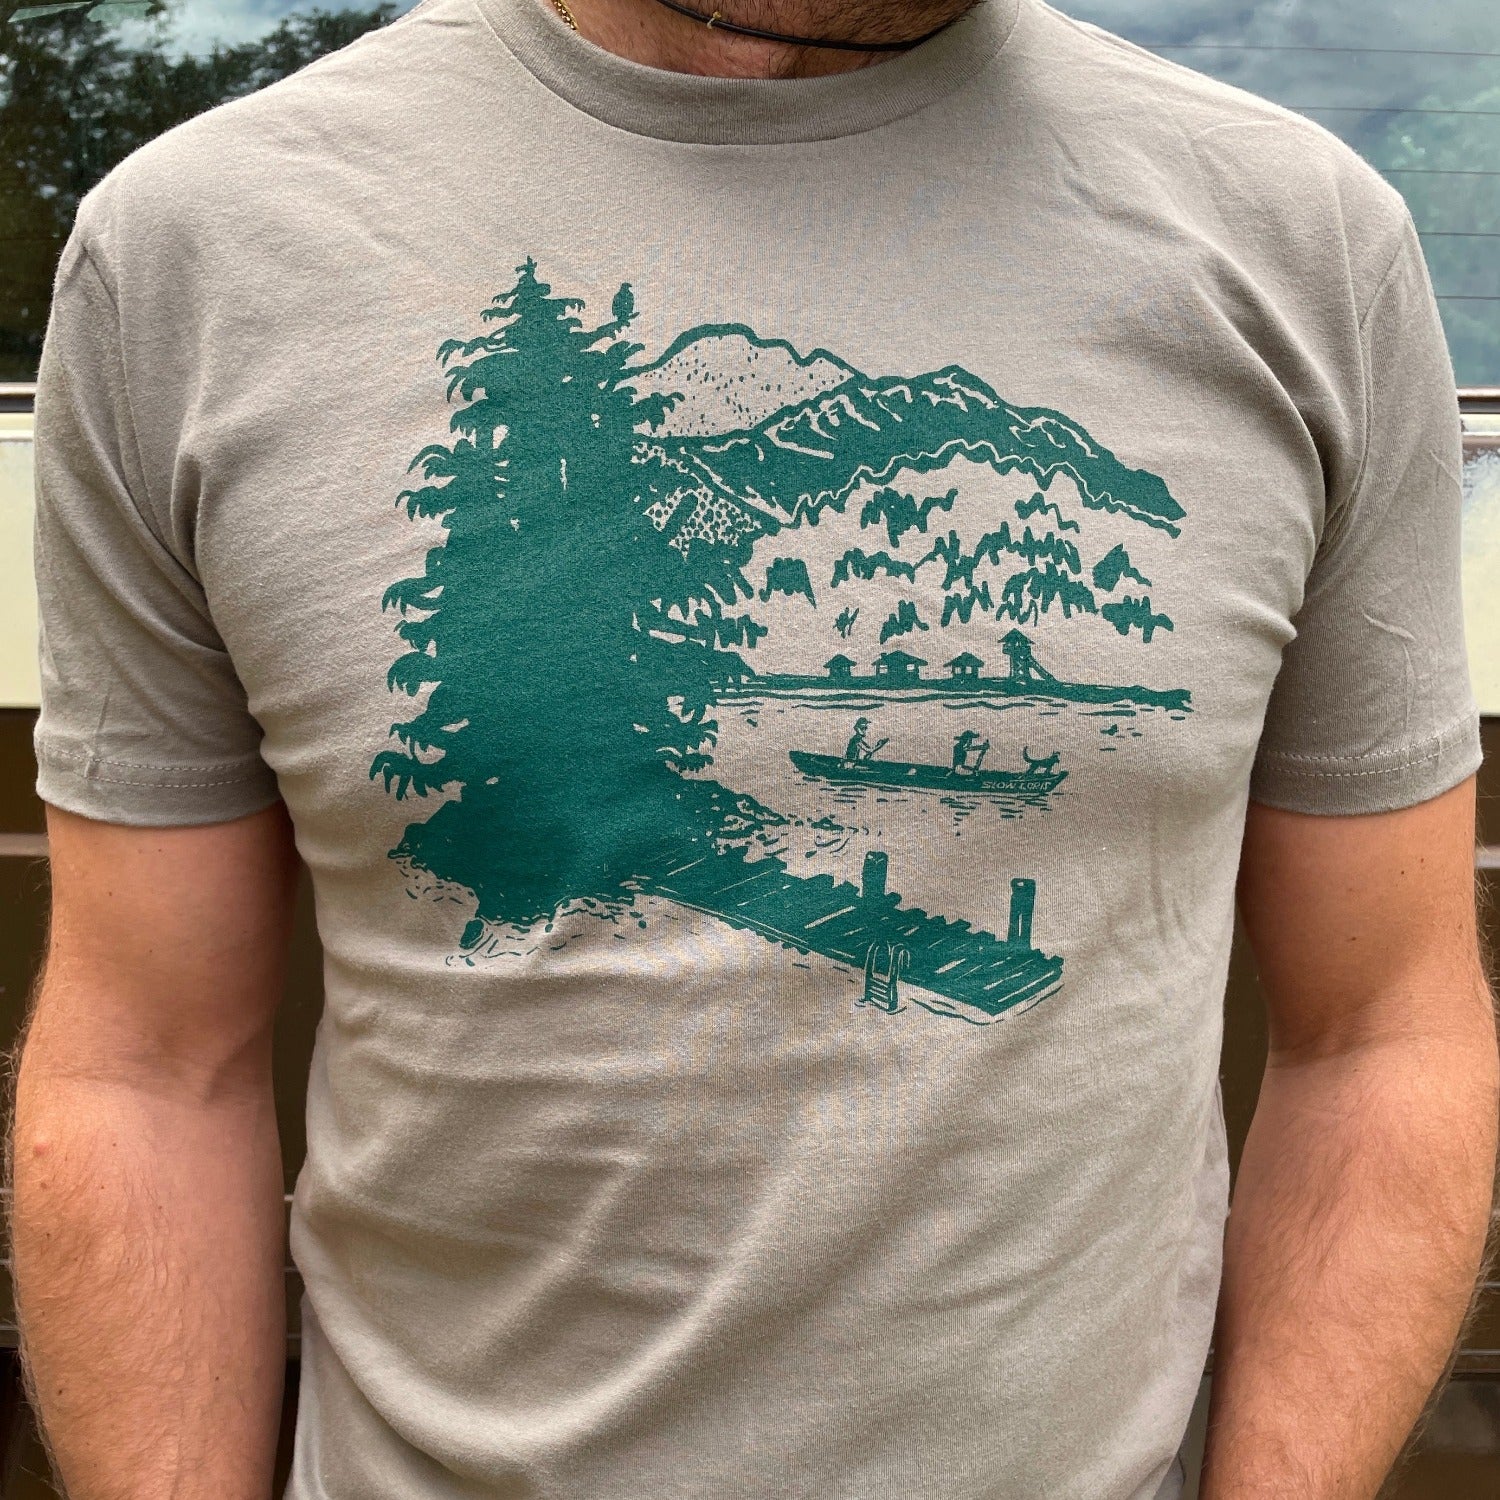 Man wearing a warm grey t-shirt with a green print of lakeside scene on it.